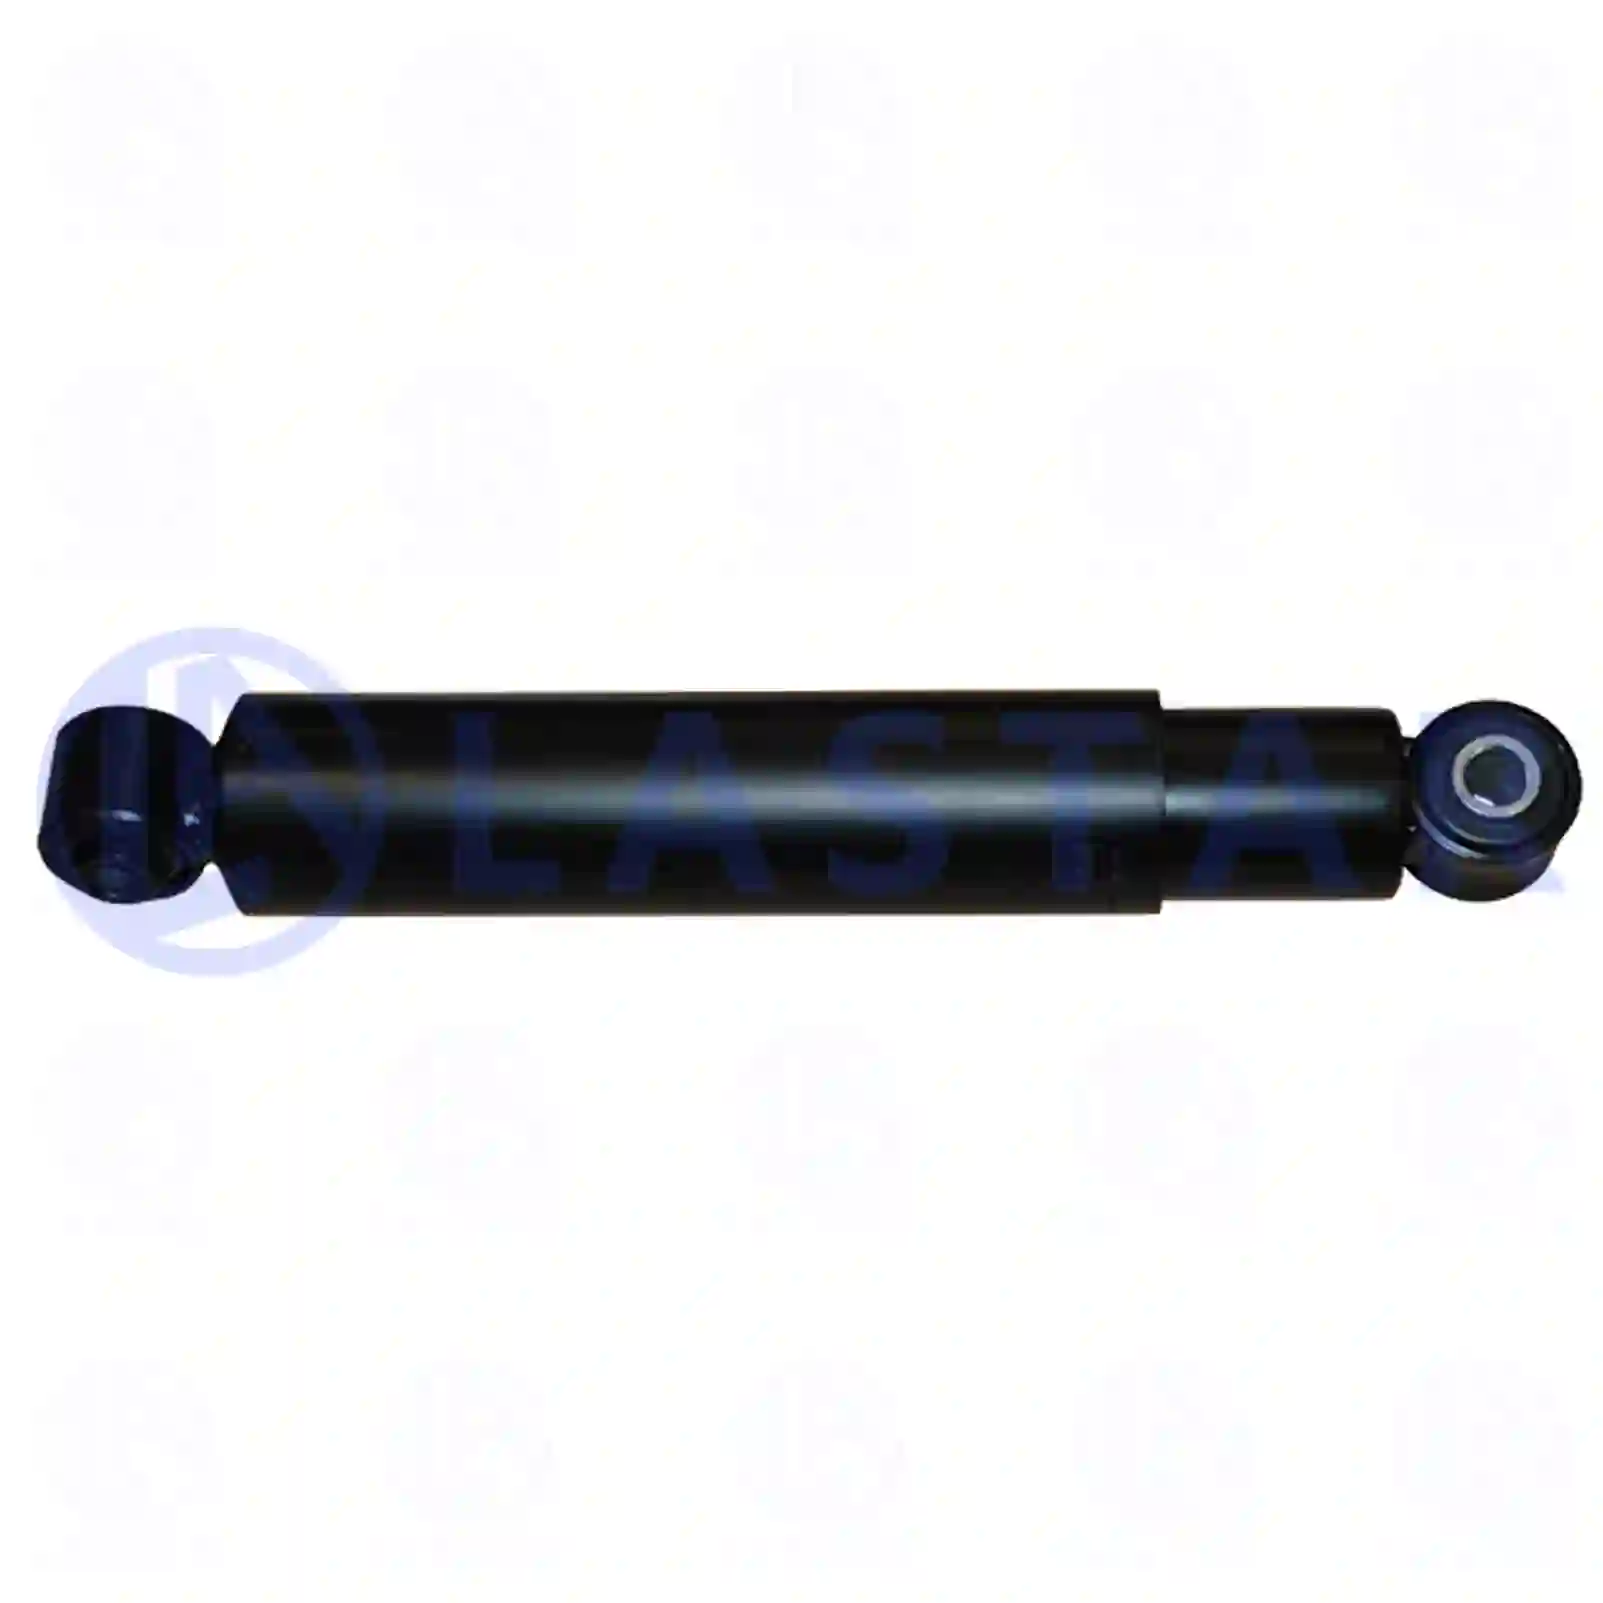 Shock absorber, 77727872, 0063262000, 0063267100, 9743261000, ZG41597-0008, ||  77727872 Lastar Spare Part | Truck Spare Parts, Auotomotive Spare Parts Shock absorber, 77727872, 0063262000, 0063267100, 9743261000, ZG41597-0008, ||  77727872 Lastar Spare Part | Truck Spare Parts, Auotomotive Spare Parts